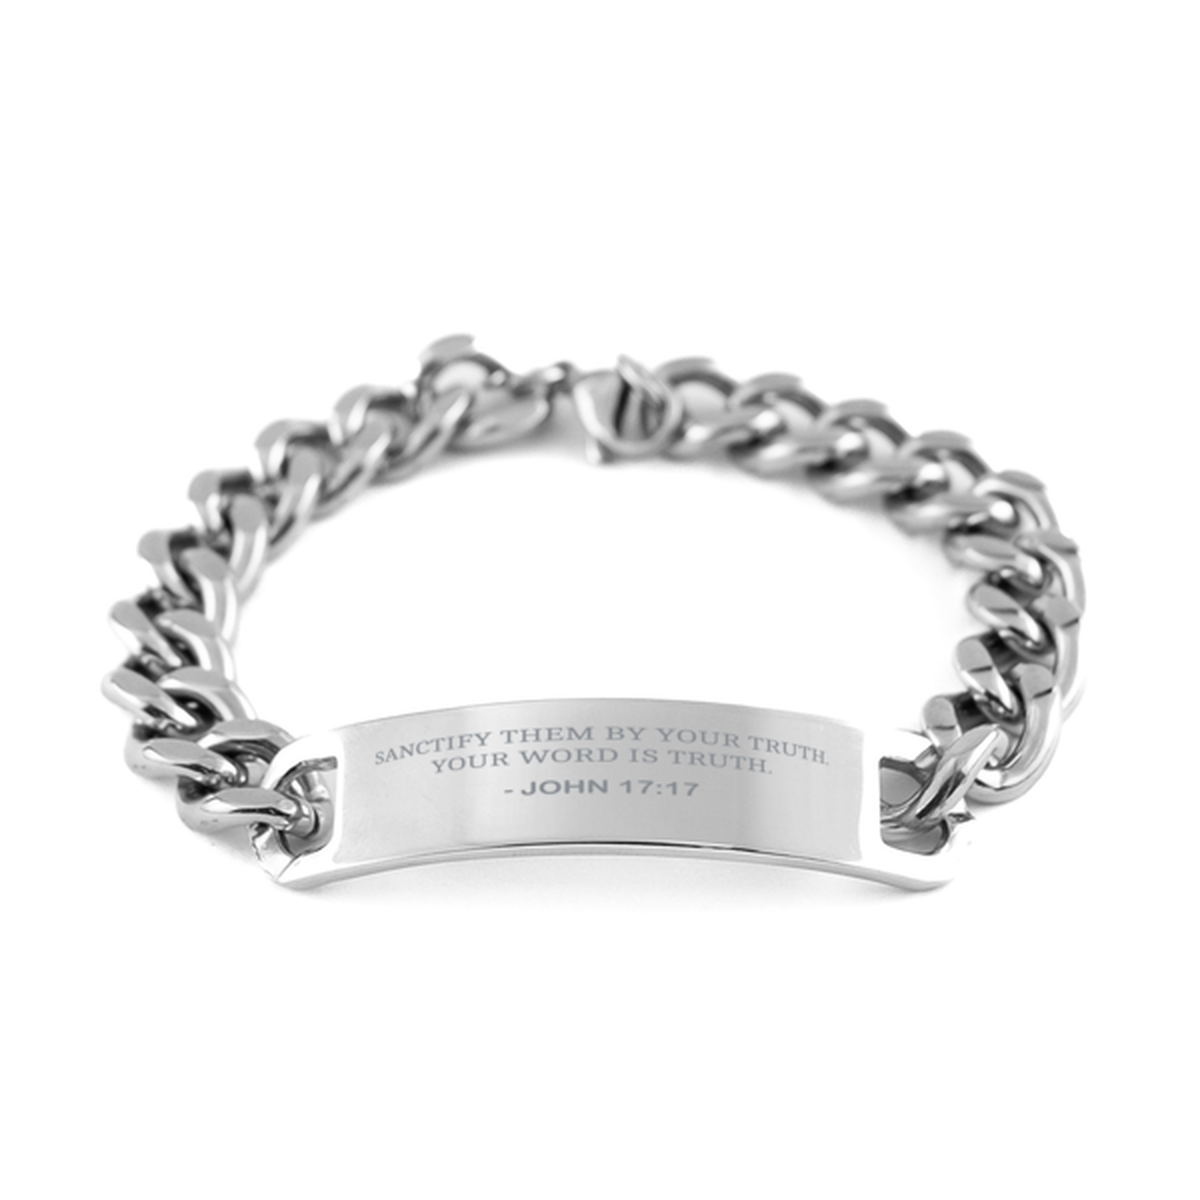 Bible Verse Chain Stainless Steel Bracelet, John 17:17 Sanctify Them By Your Truth. Your Word Is, Inspirational Christian Gifts For Men Women